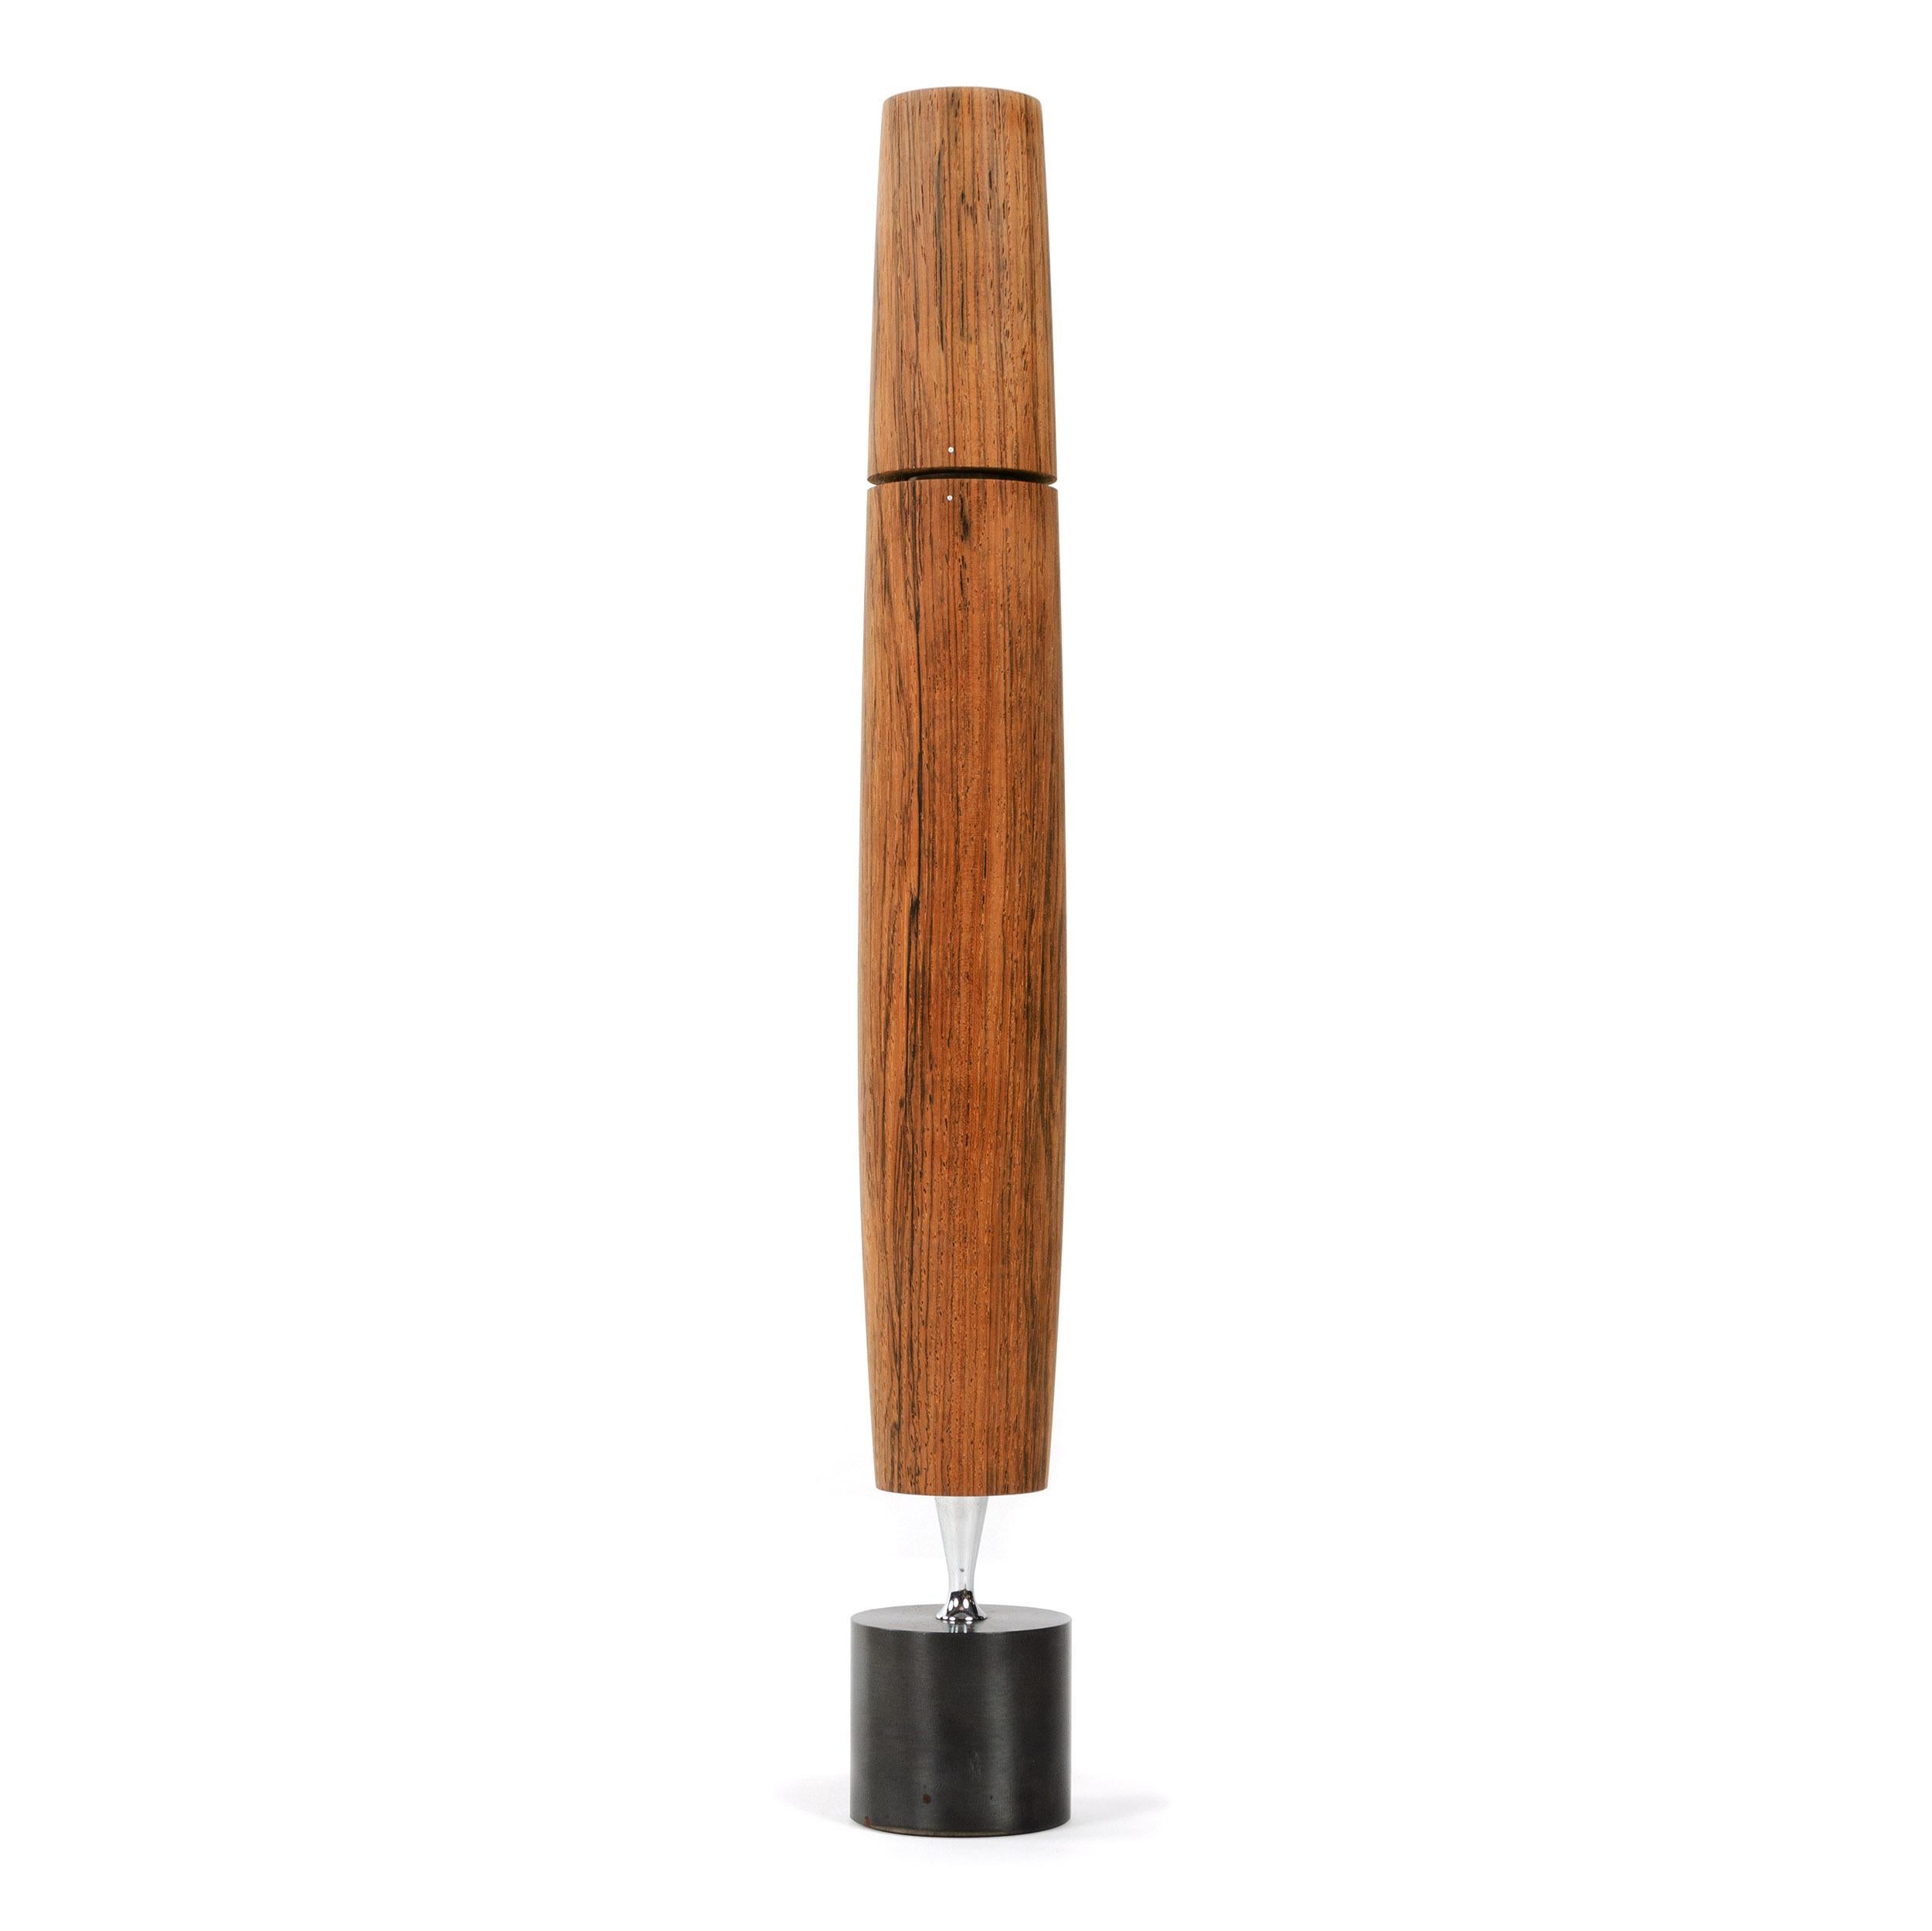 A figured wood 'Varaflame' butane candlestick with chrome stem on a patinated steel base.